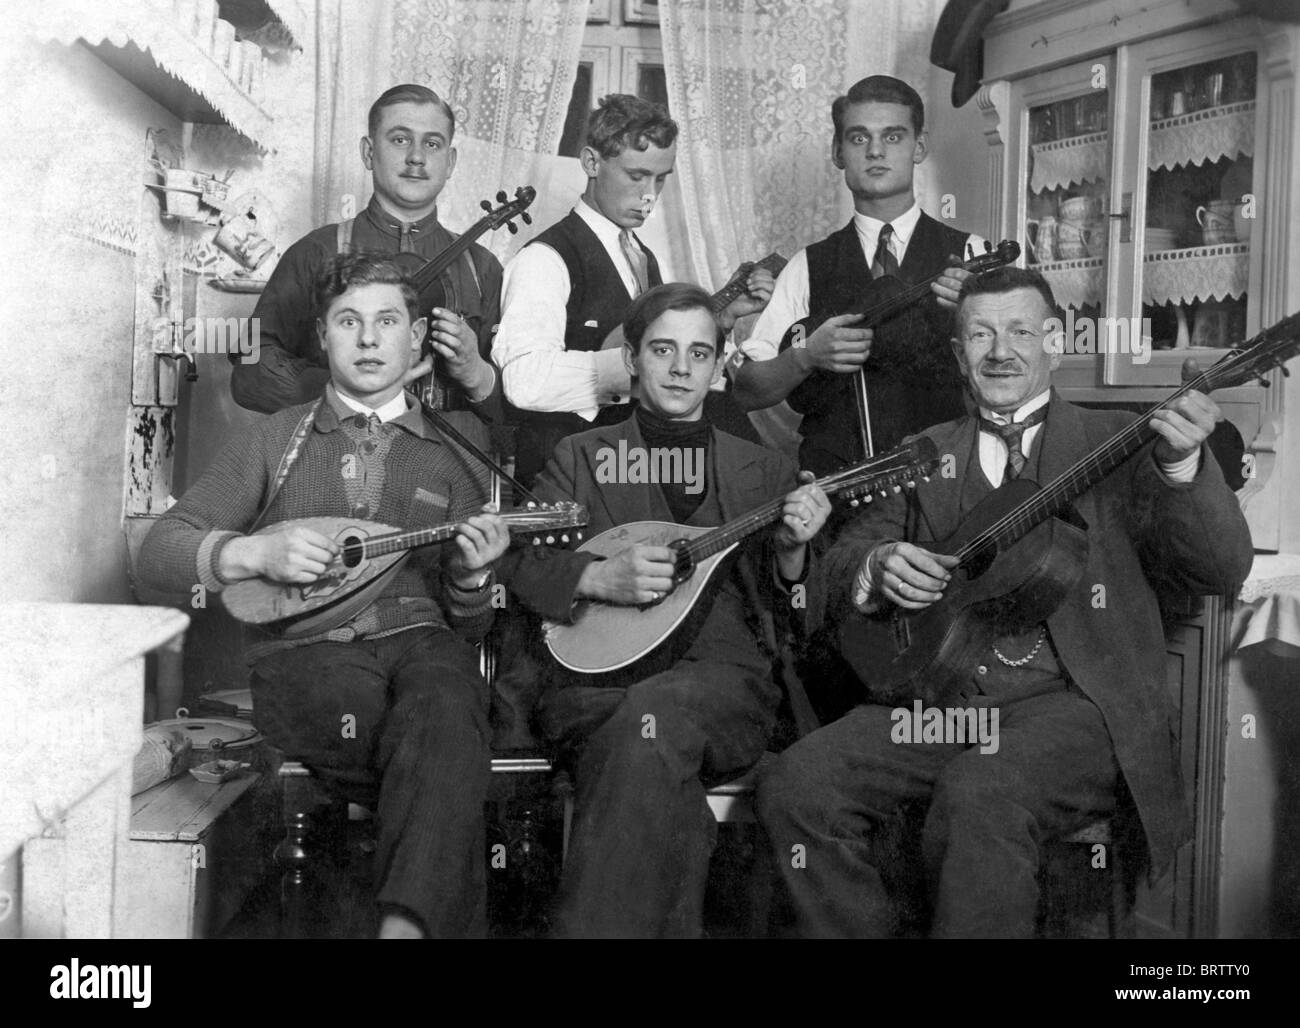 Band of musicians, historical image, ca. 1930 Stock Photo